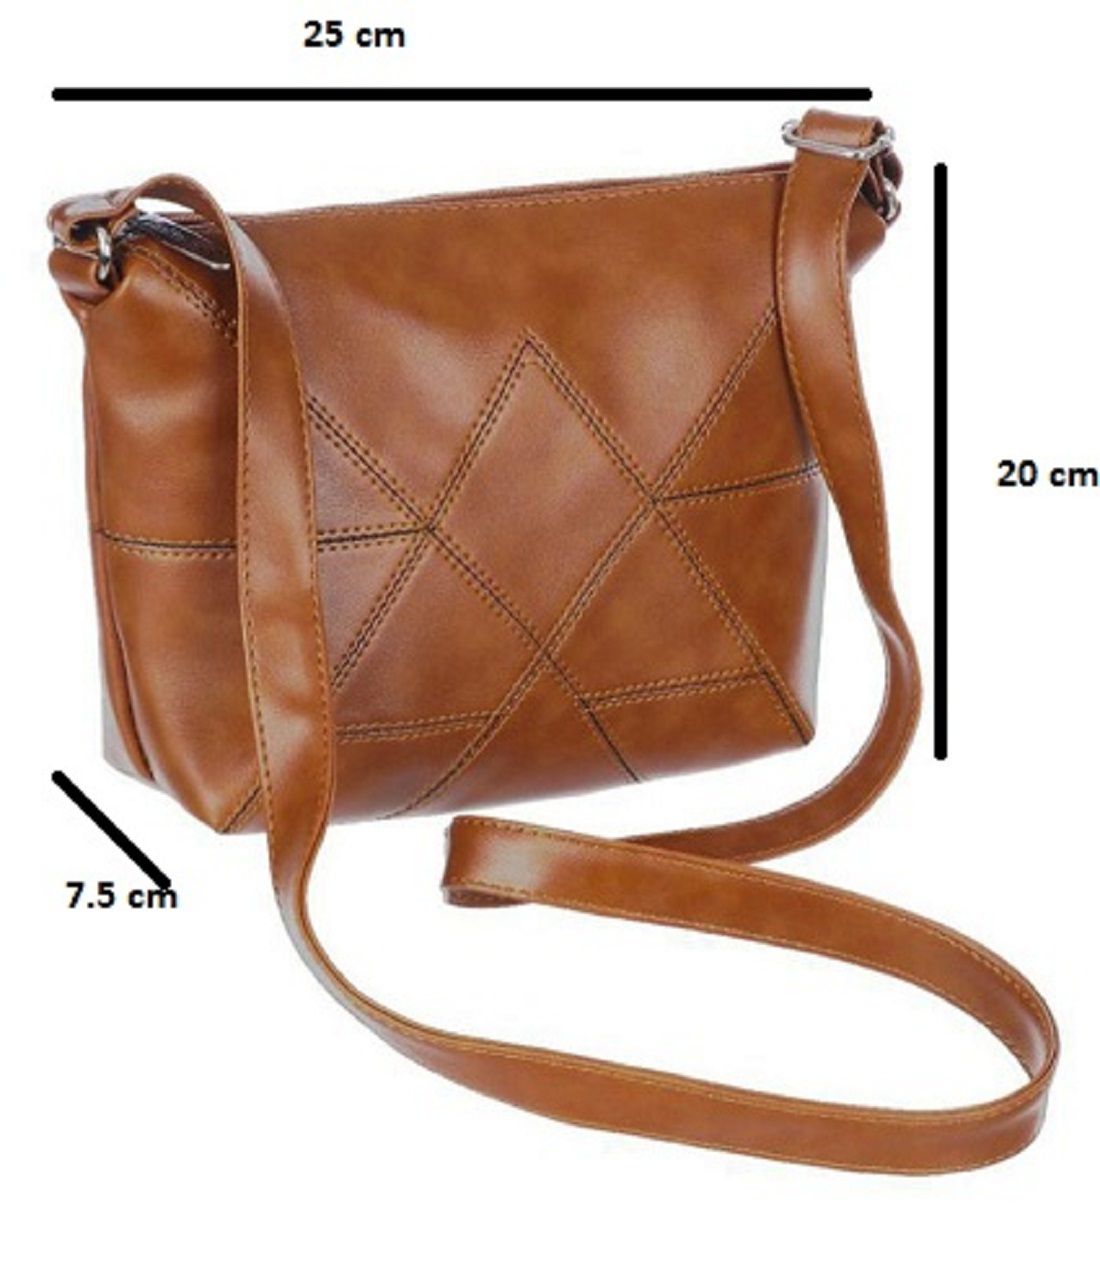 sling bags snapdeal